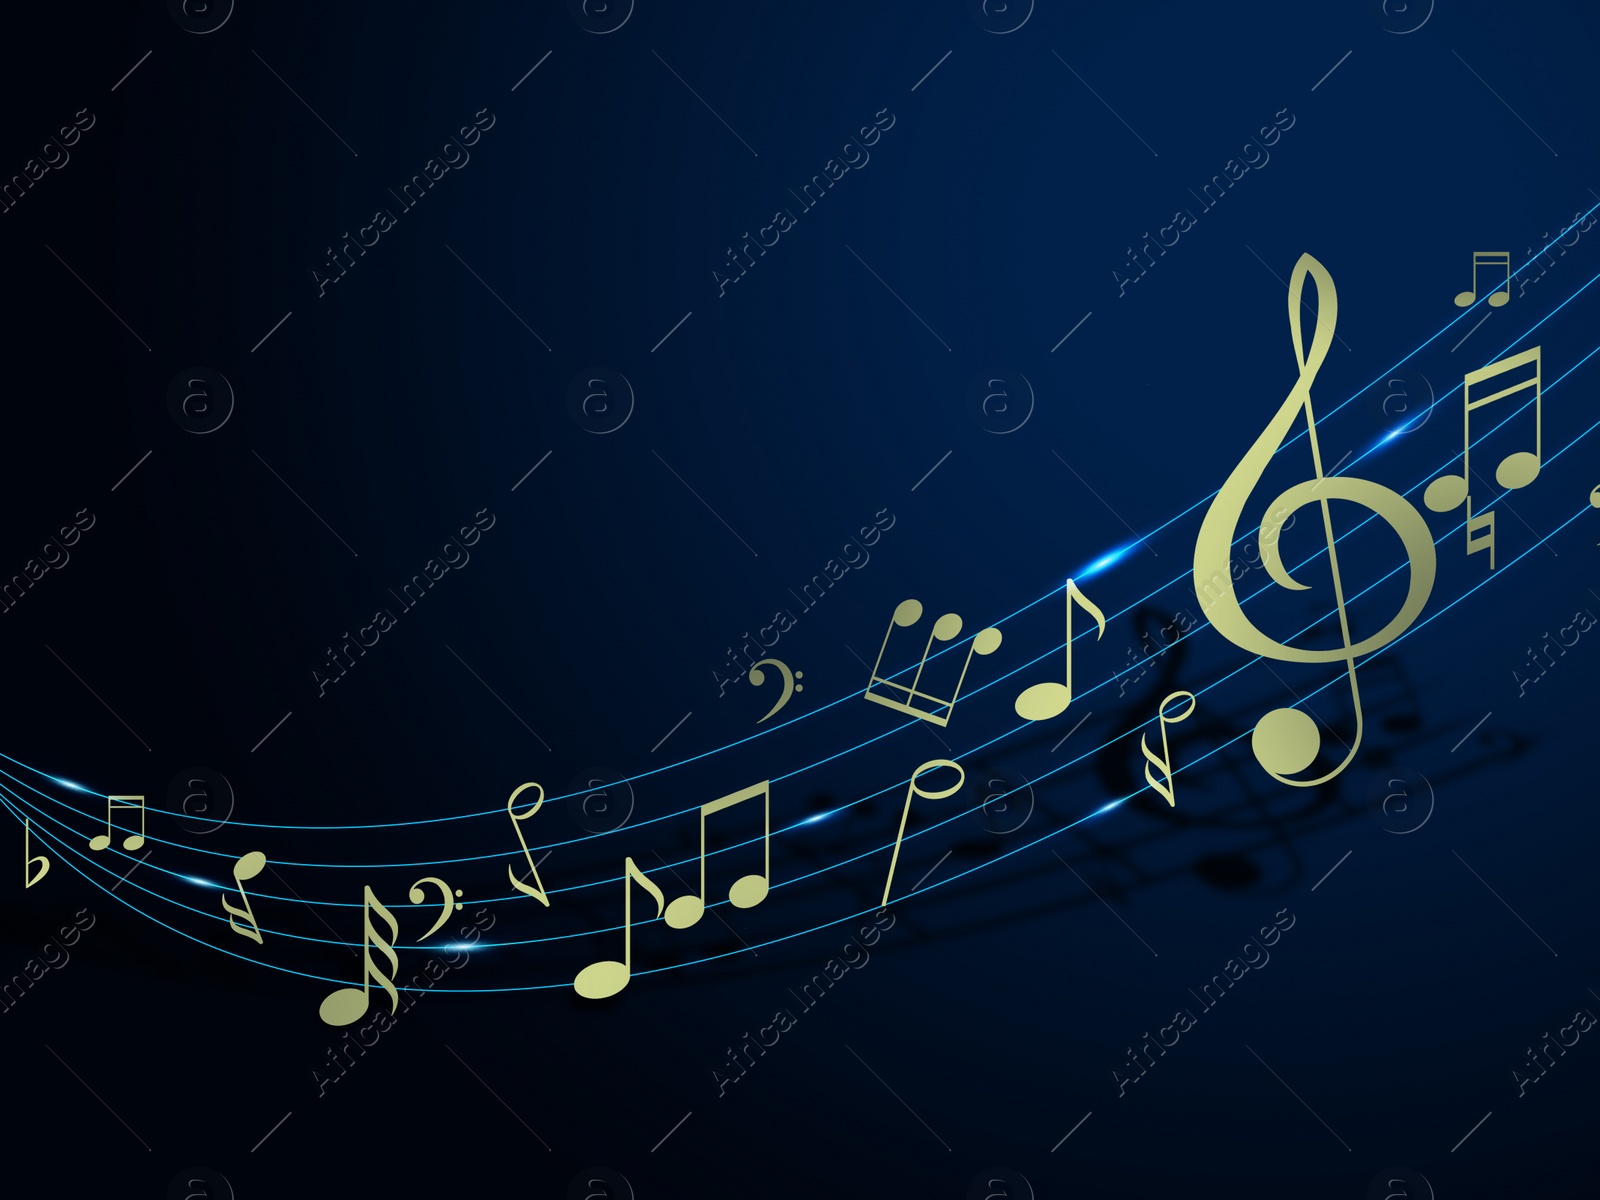 Illustration of Staff with music notes and other musical symbols on dark blue background